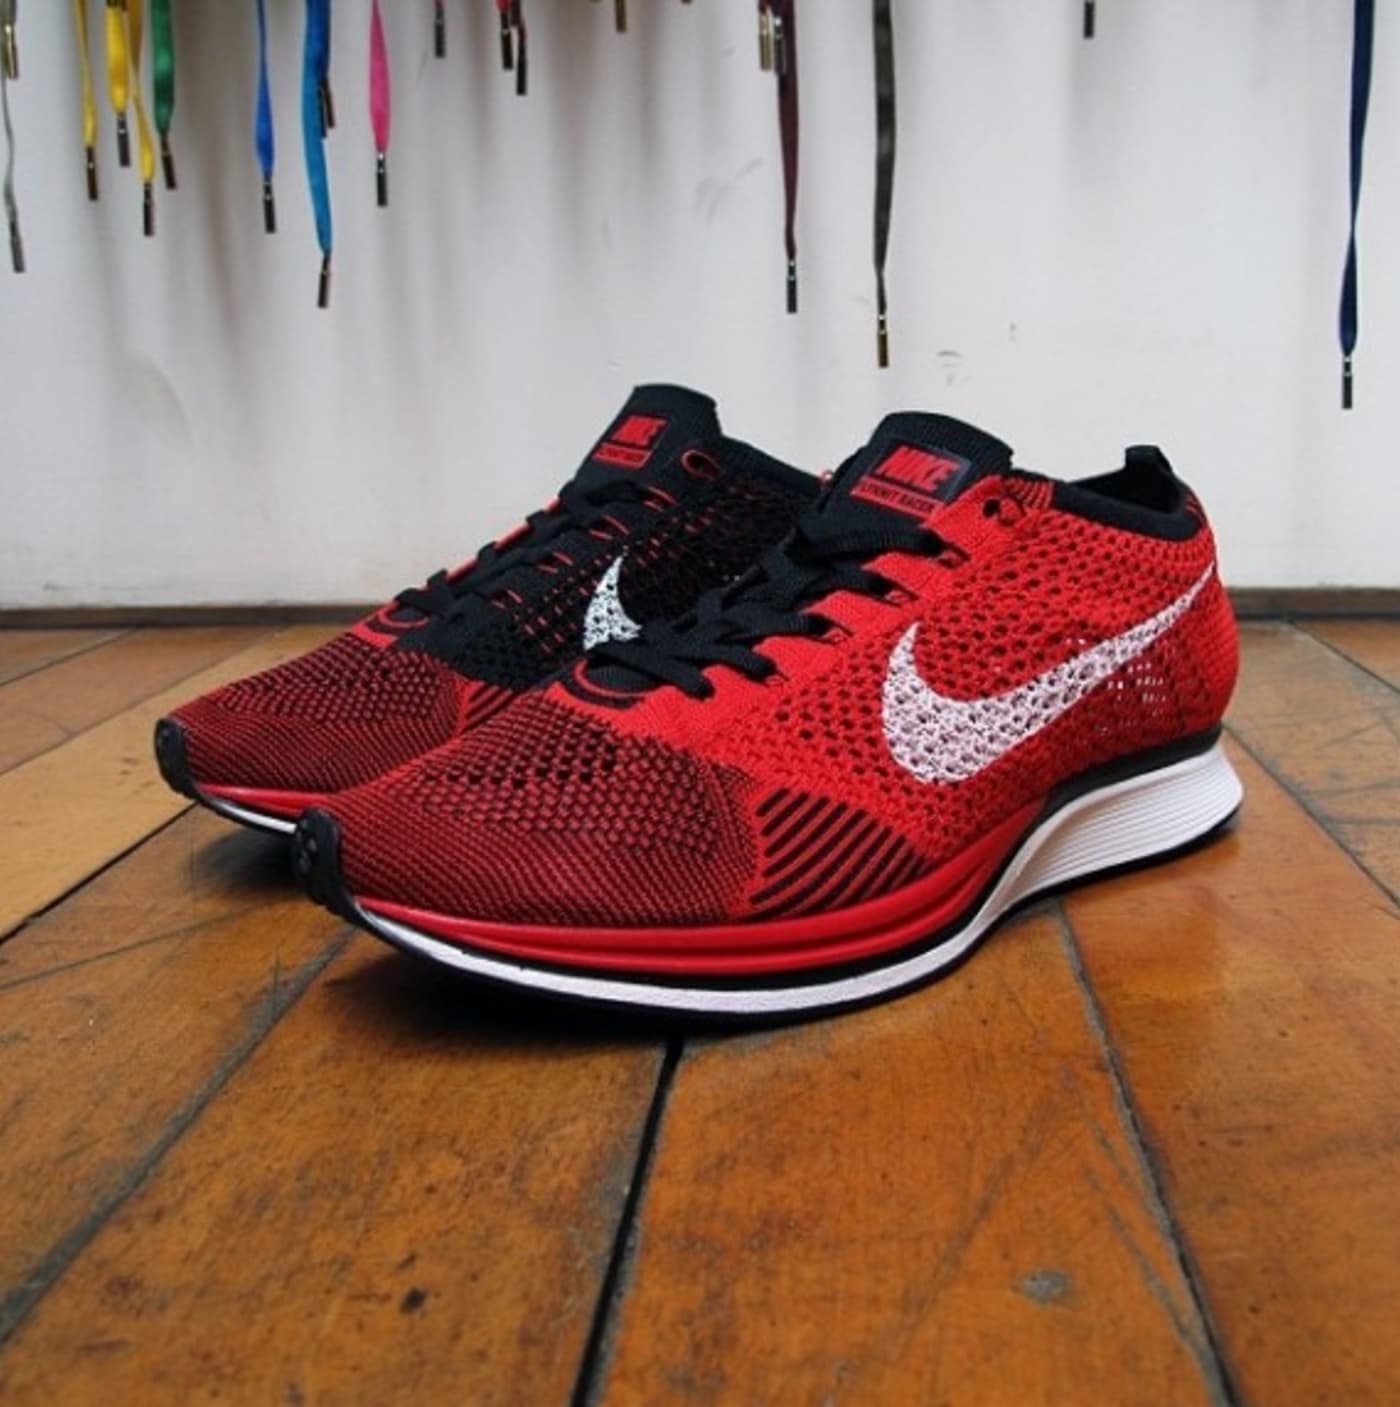 Nike Racer “Red/Black” | Complex